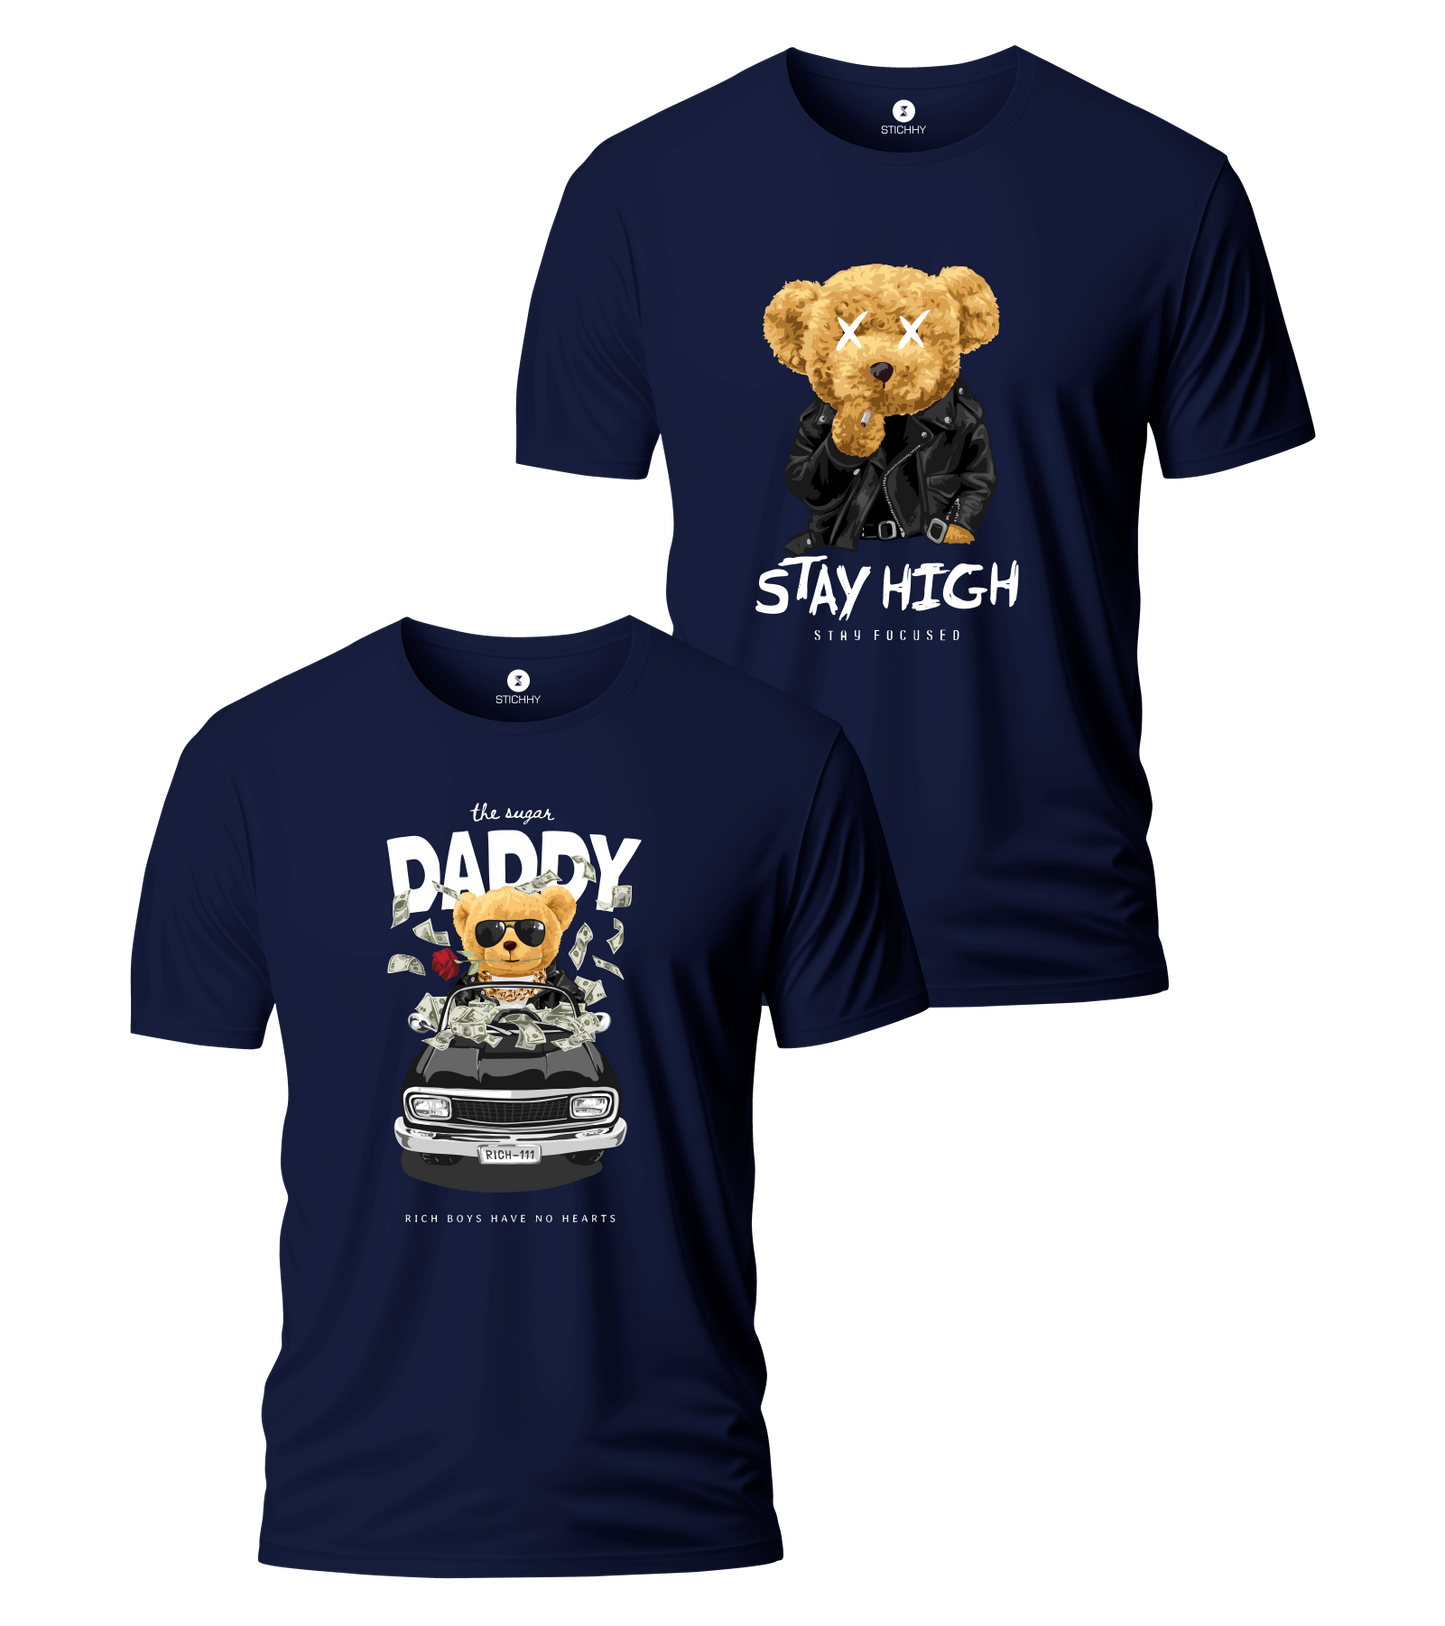 DADDY X STAY HIGH T-SHIRT BUY 1 GET 1 FREE